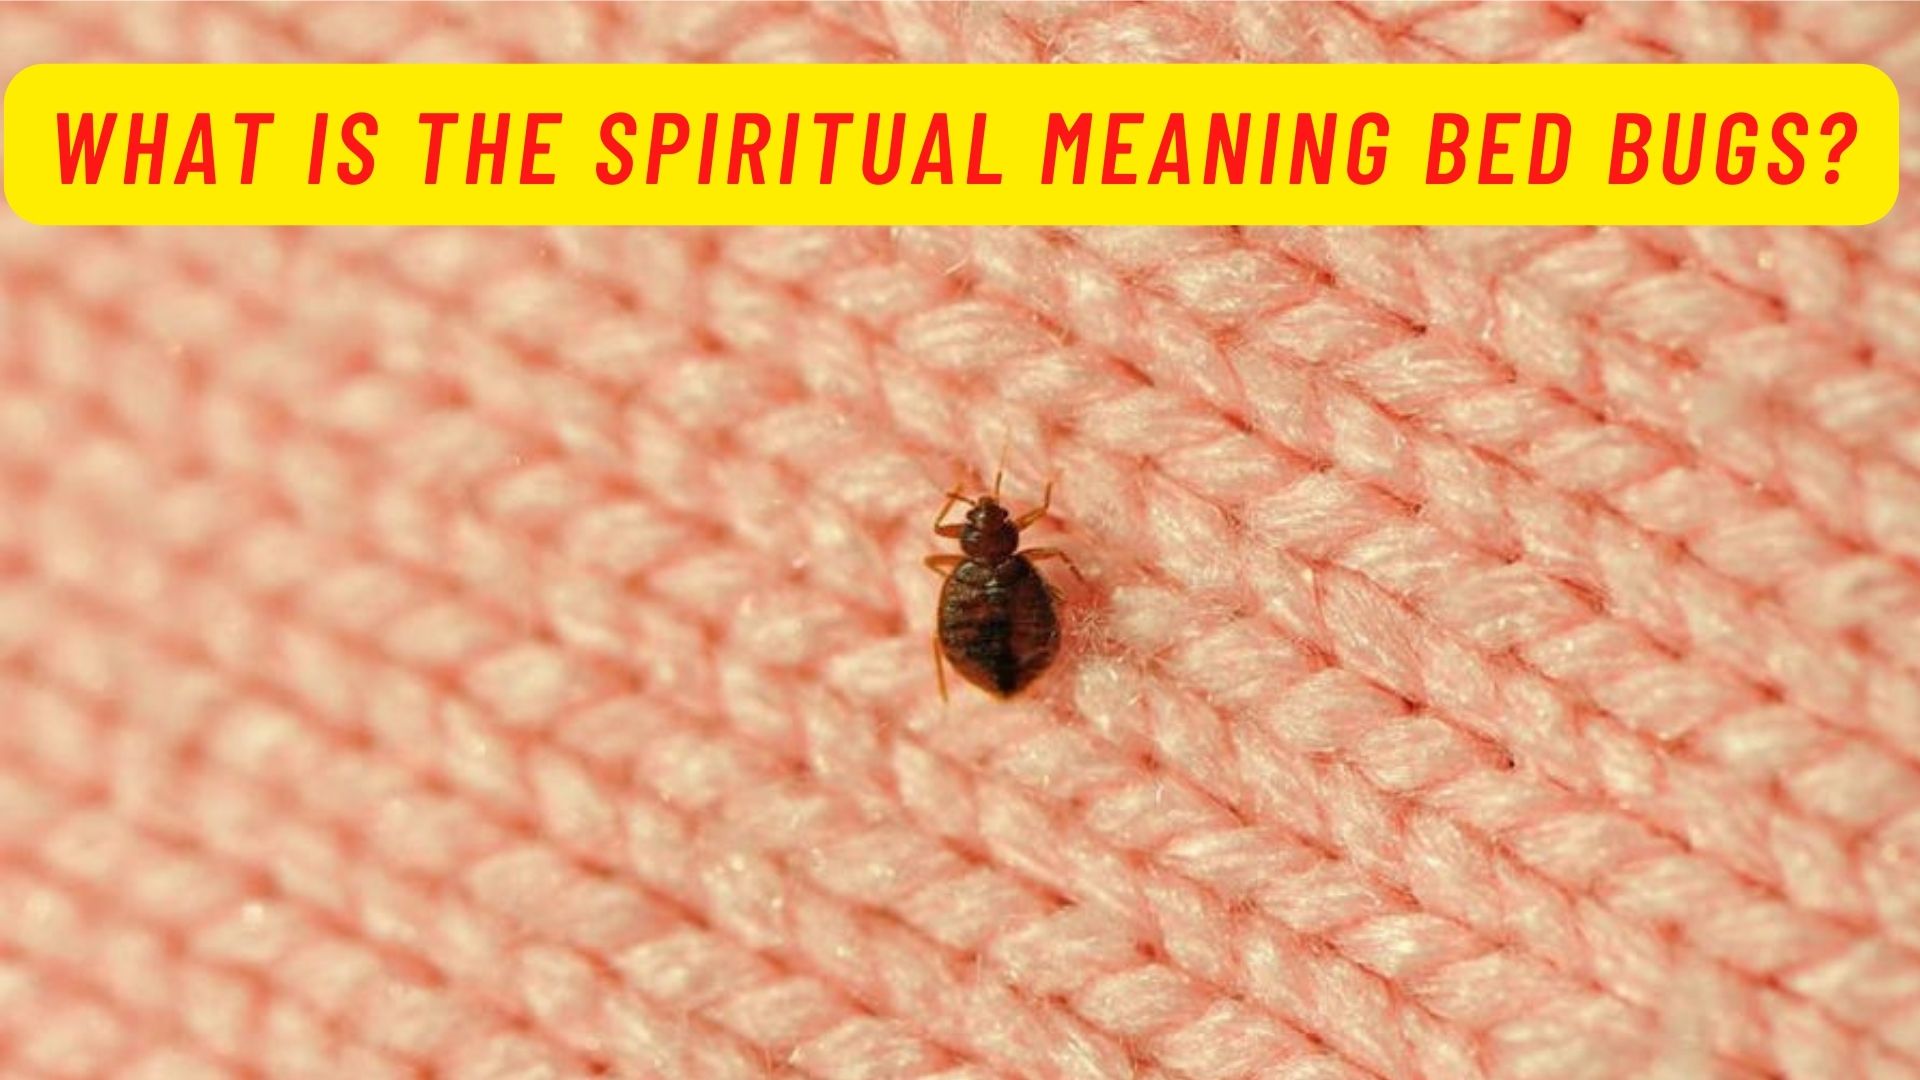 What Is The Spiritual Meaning Bed Bugs?